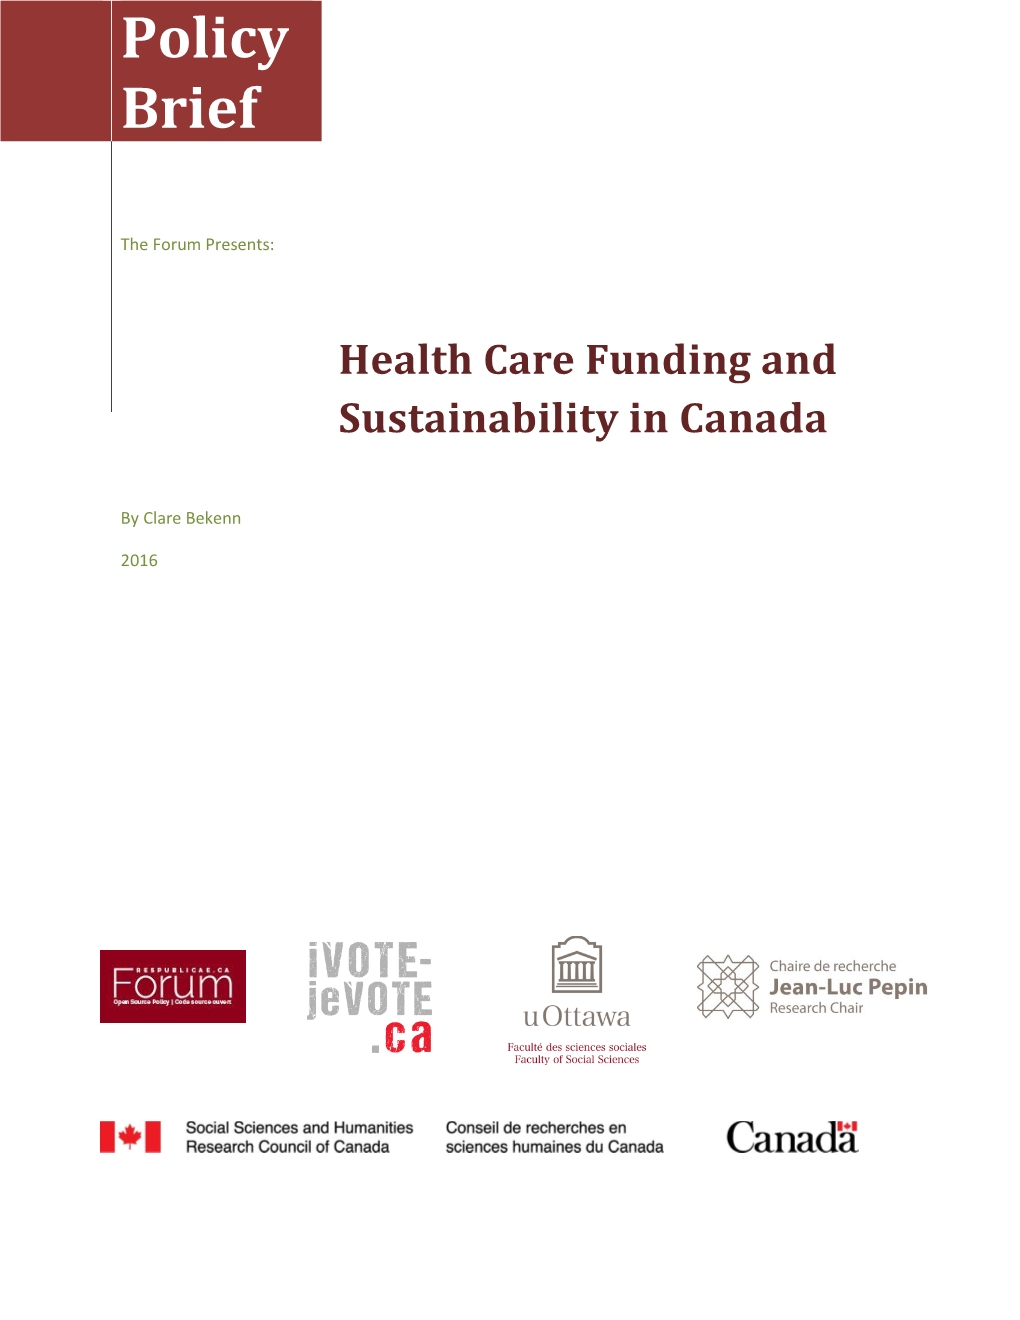 Health Care Funding and Sustainability in Canada